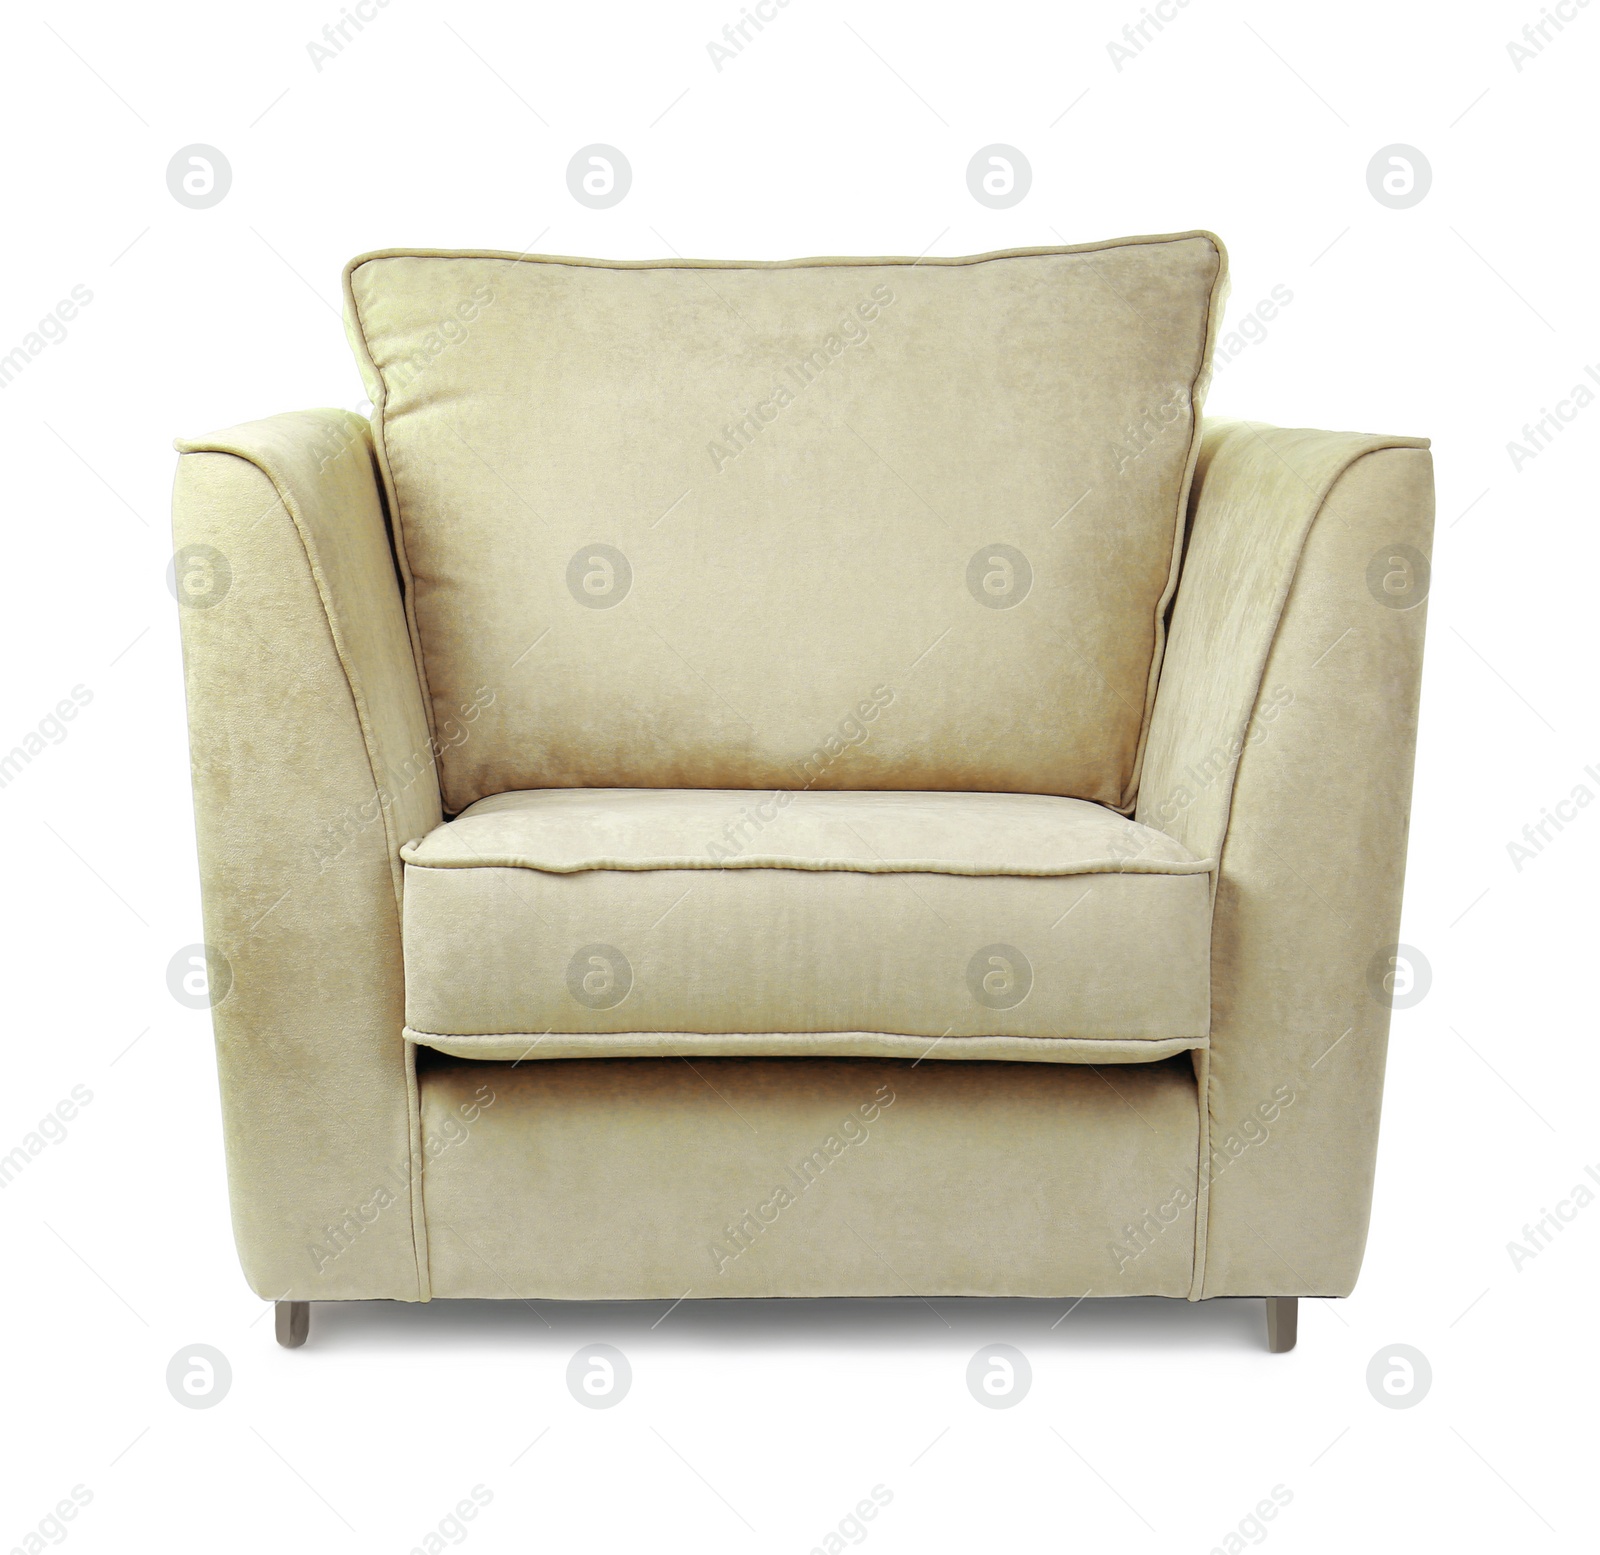 Image of One comfortable light yellow armchair isolated on white